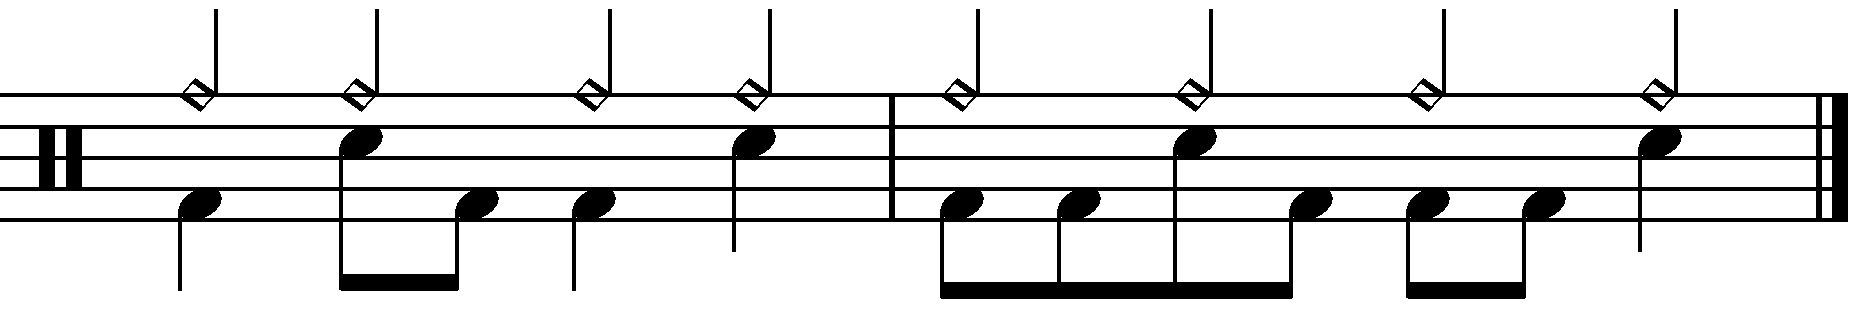 Additional 2 Bar Grooves - 3